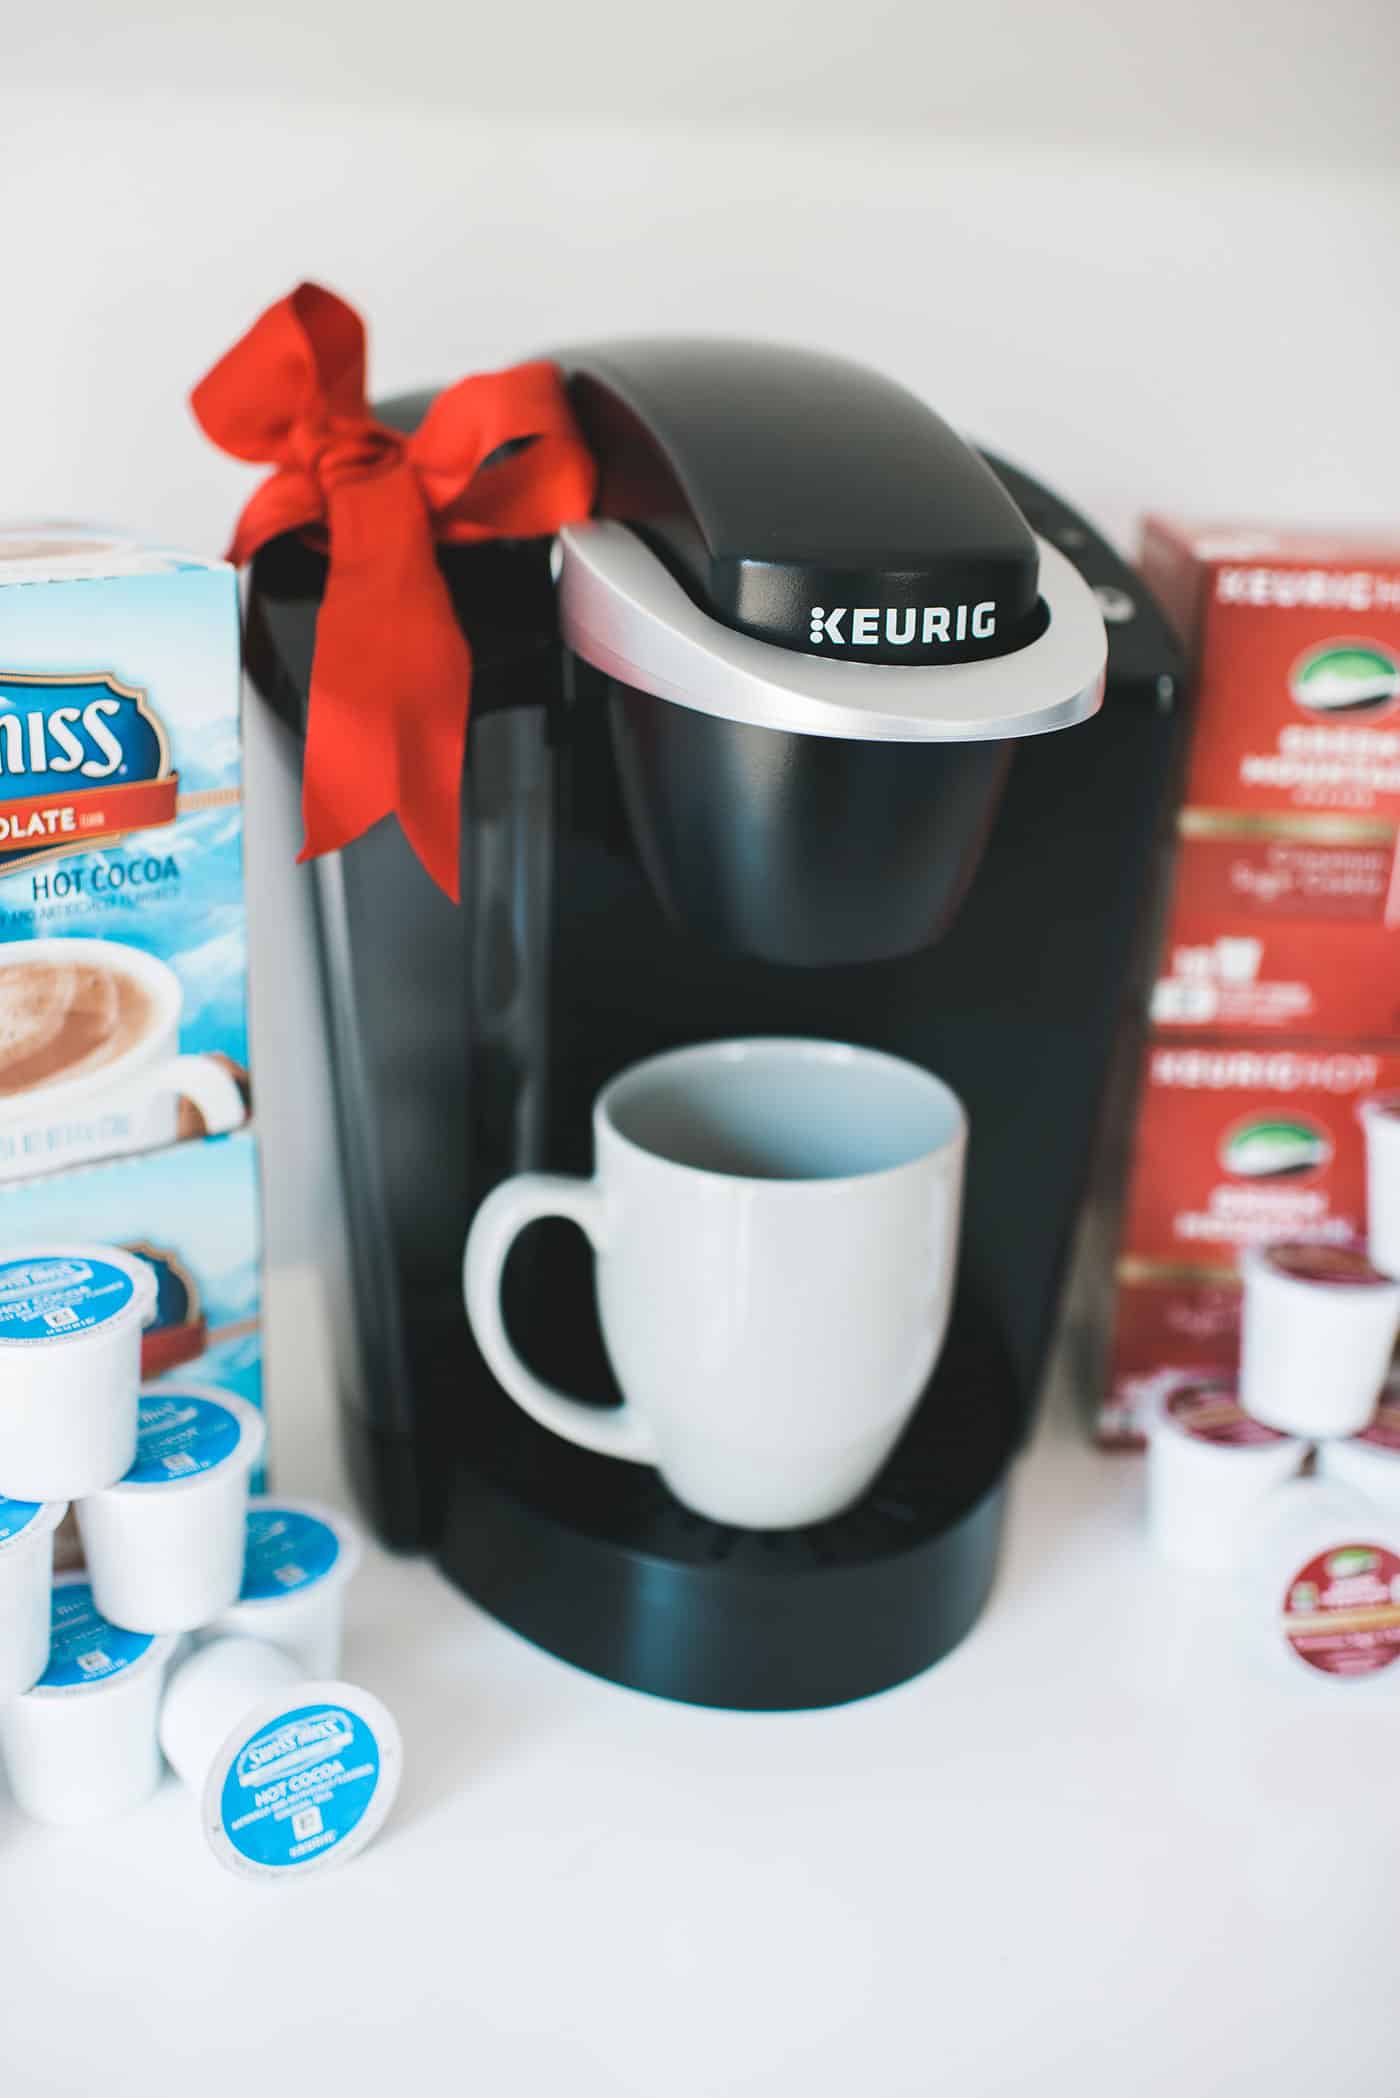 Tiffani Thiessen's Holiday Gift Guide 2016: For the busy parents, coffee enthusiast or hostess: Keurig K55 Brewer 